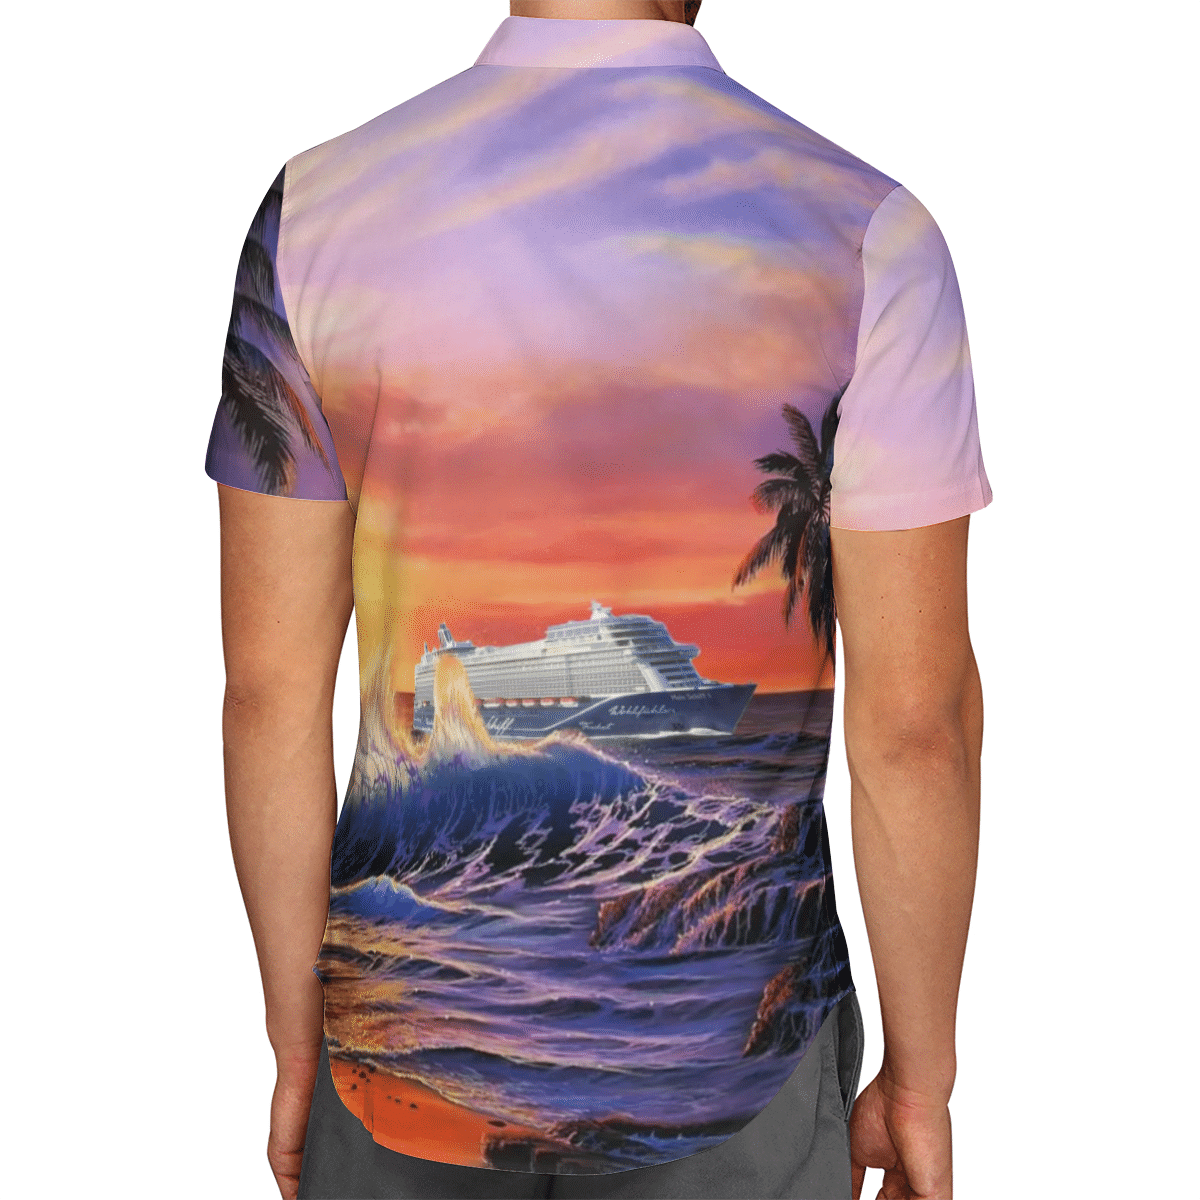 Going to the beach with a quality shirt 105